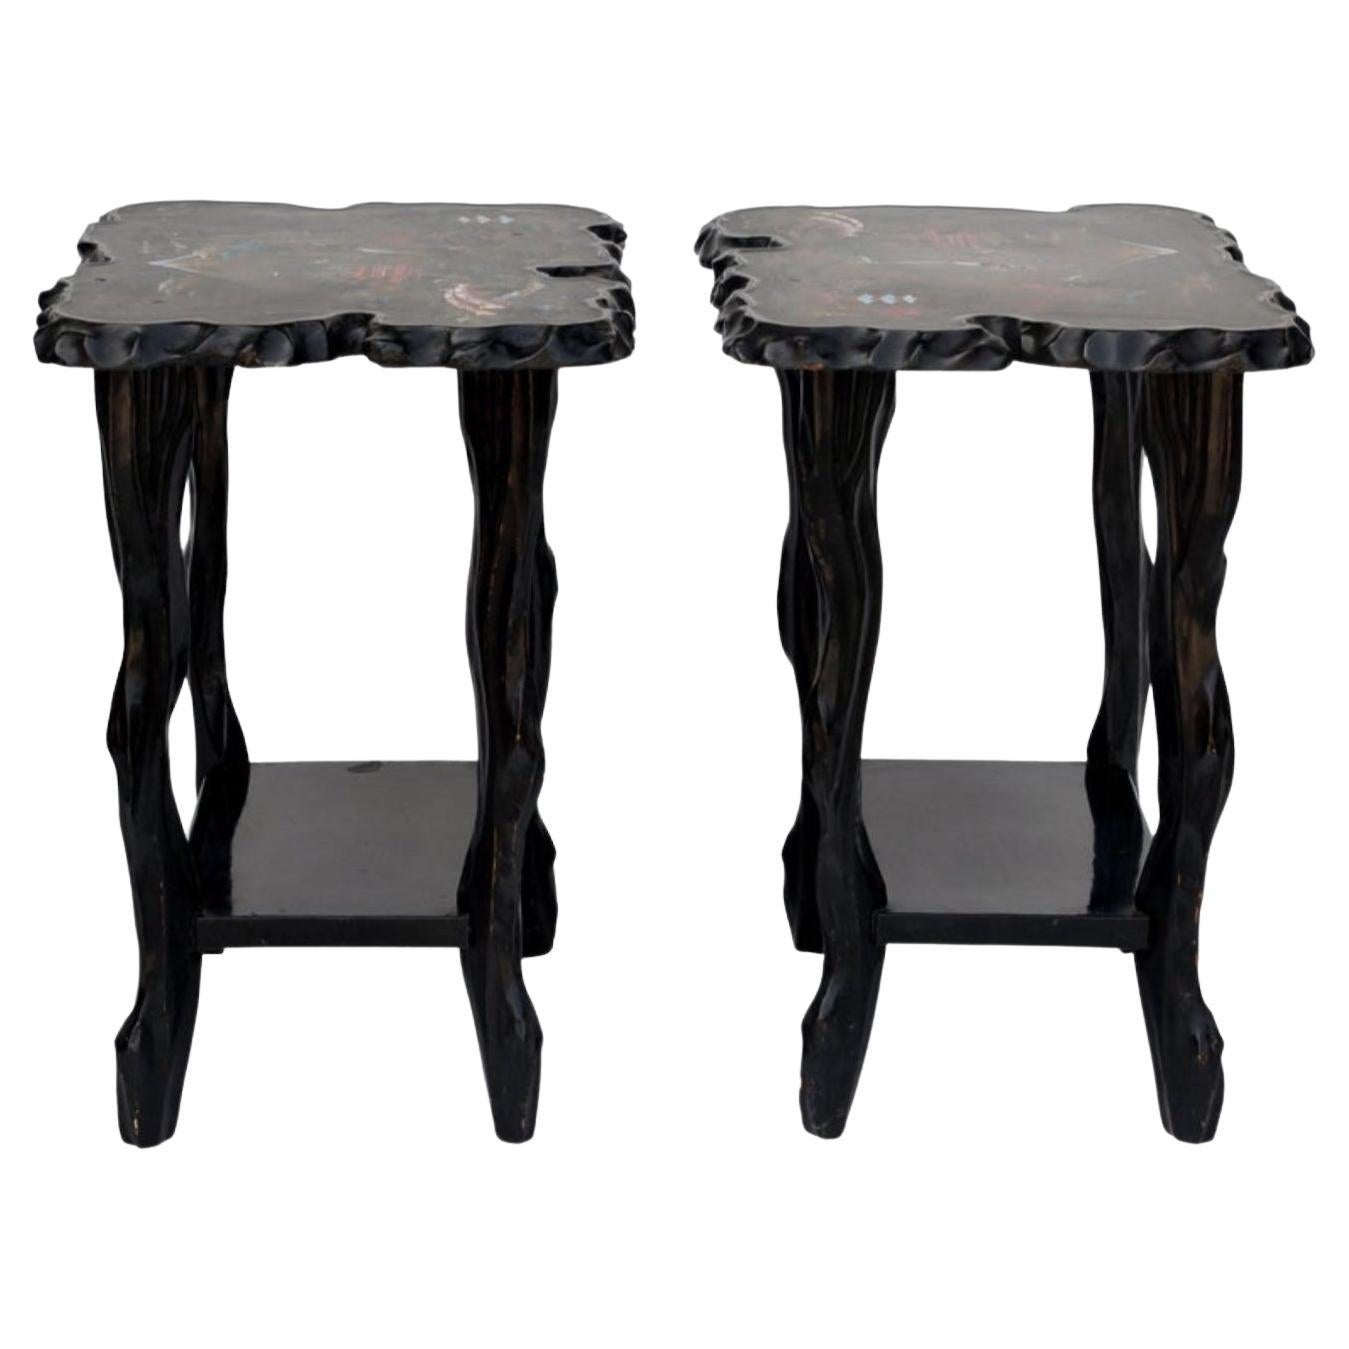 Pair of Black Lacquer Ebonized and Inlaid Wood Organic End Tables For Sale